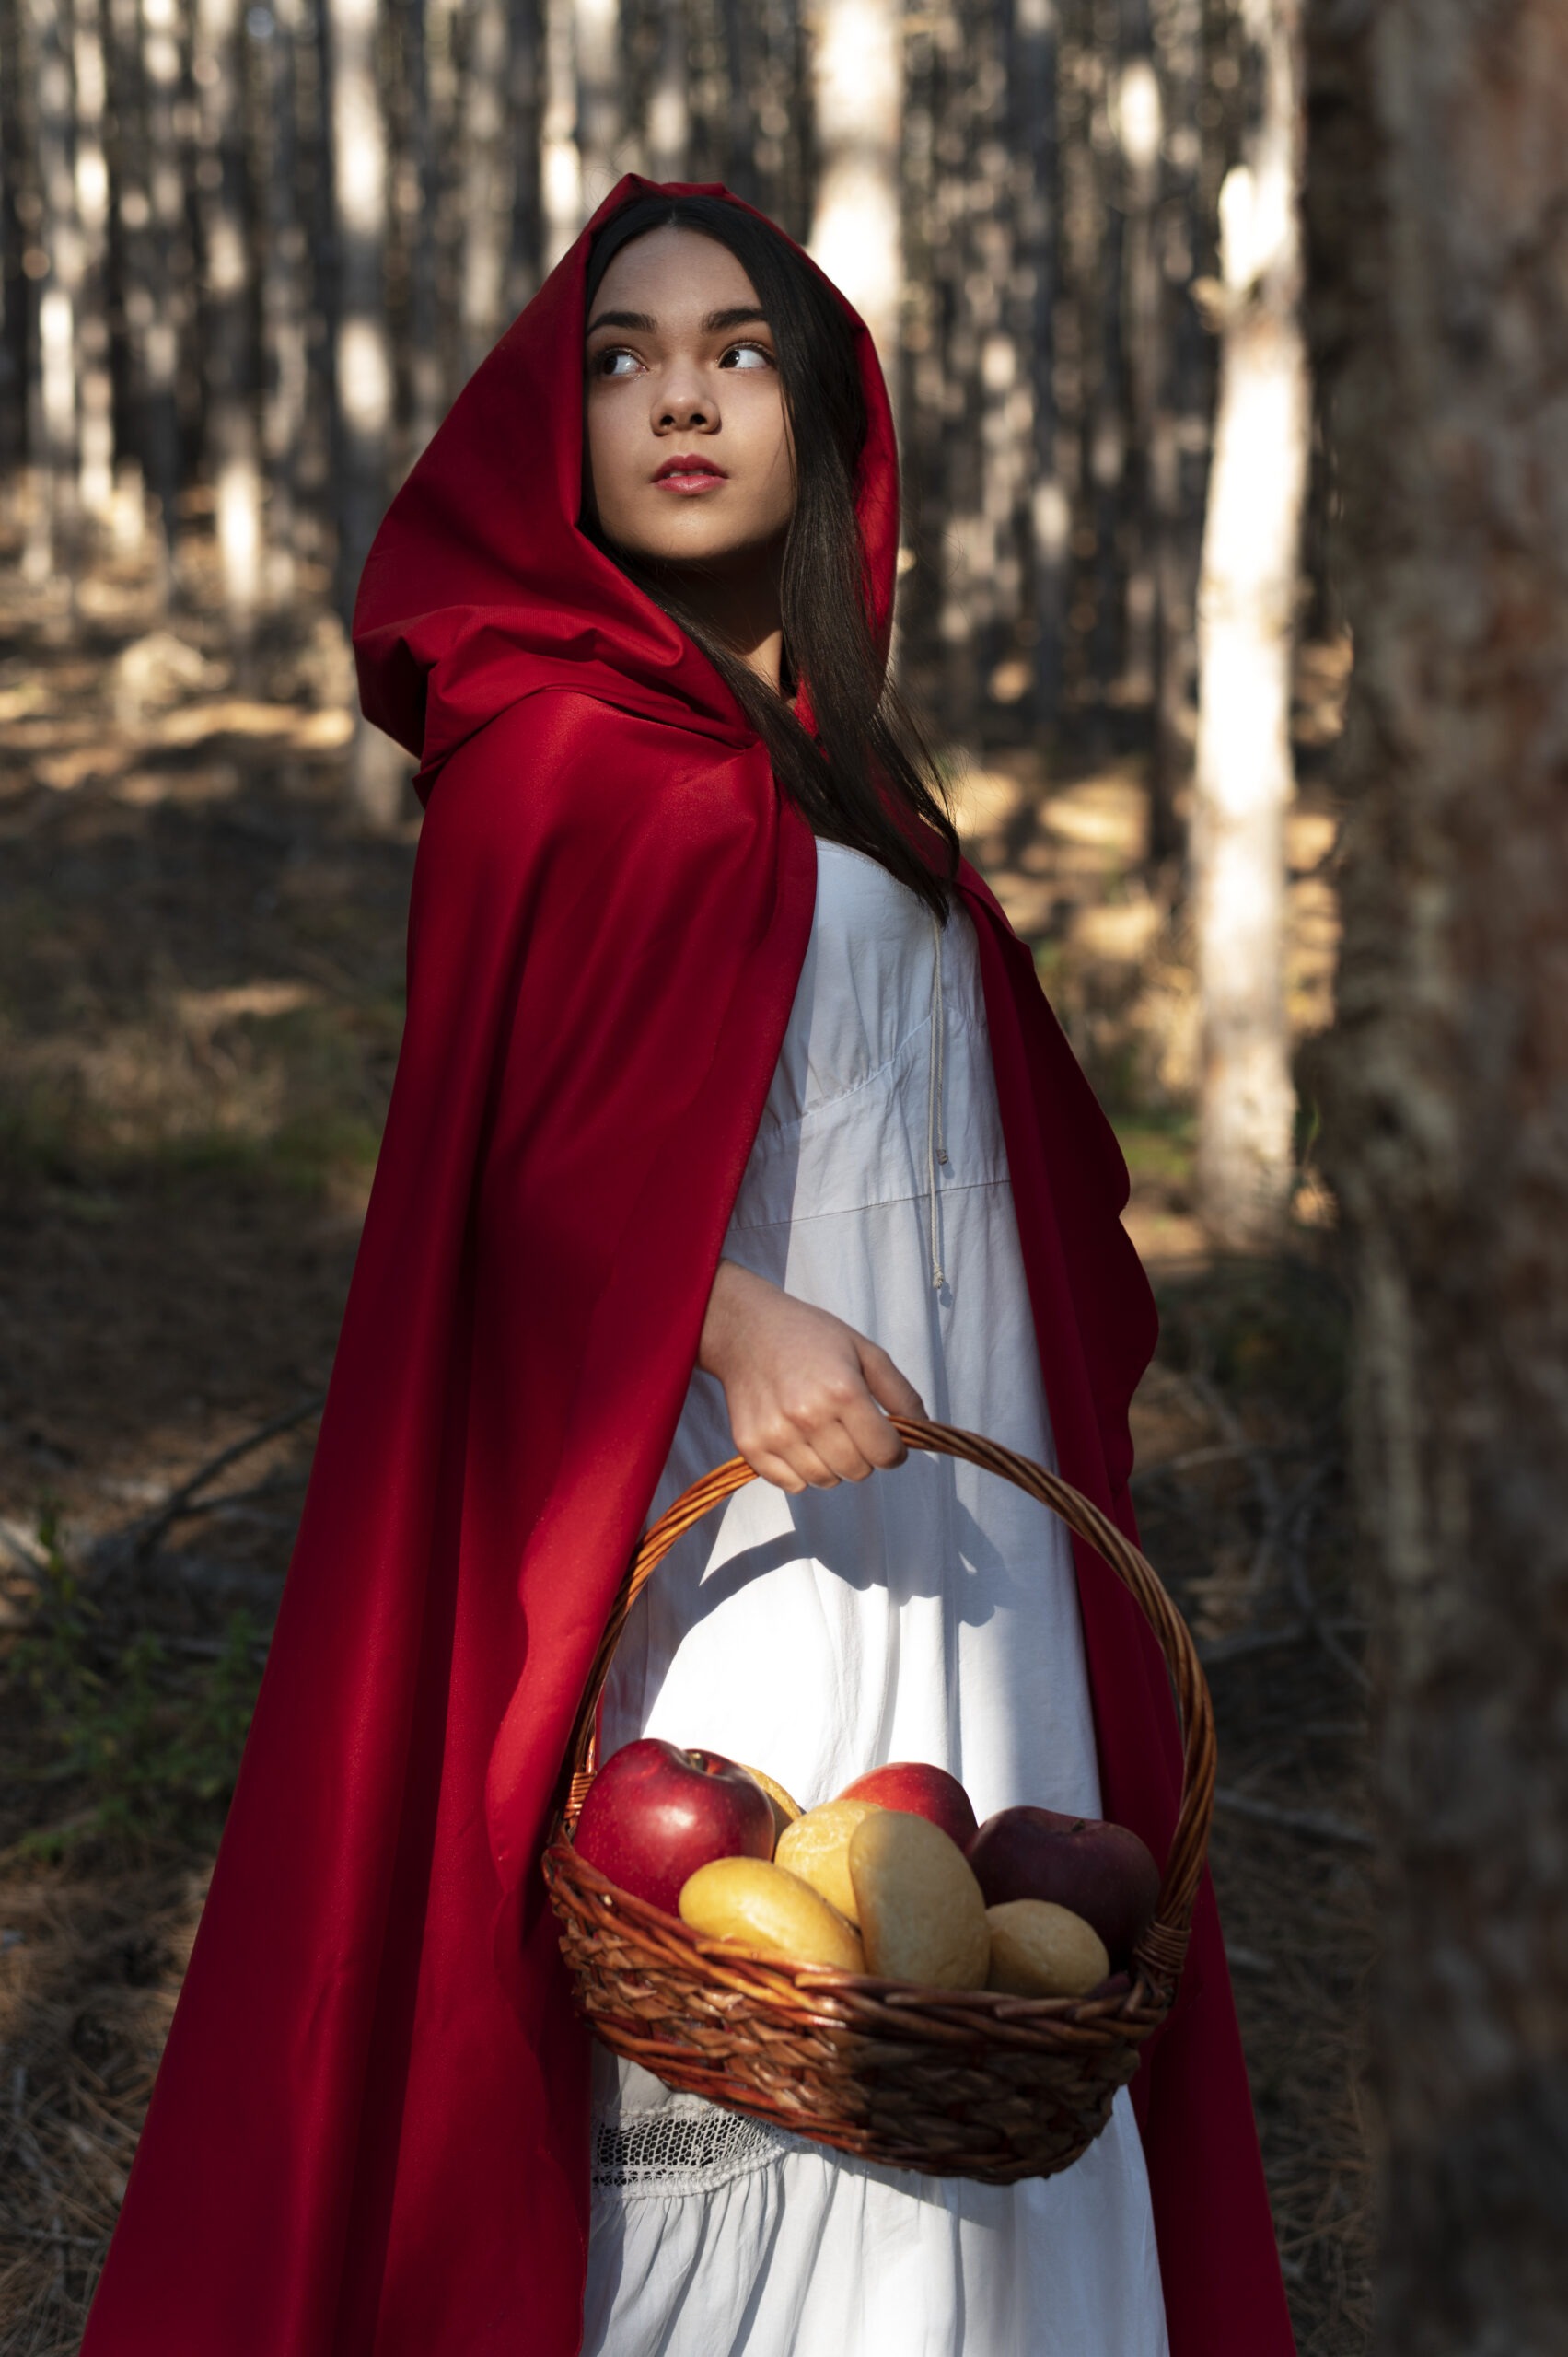 Delightful Encounters in the Woods: Little Red Riding Hood's Tale